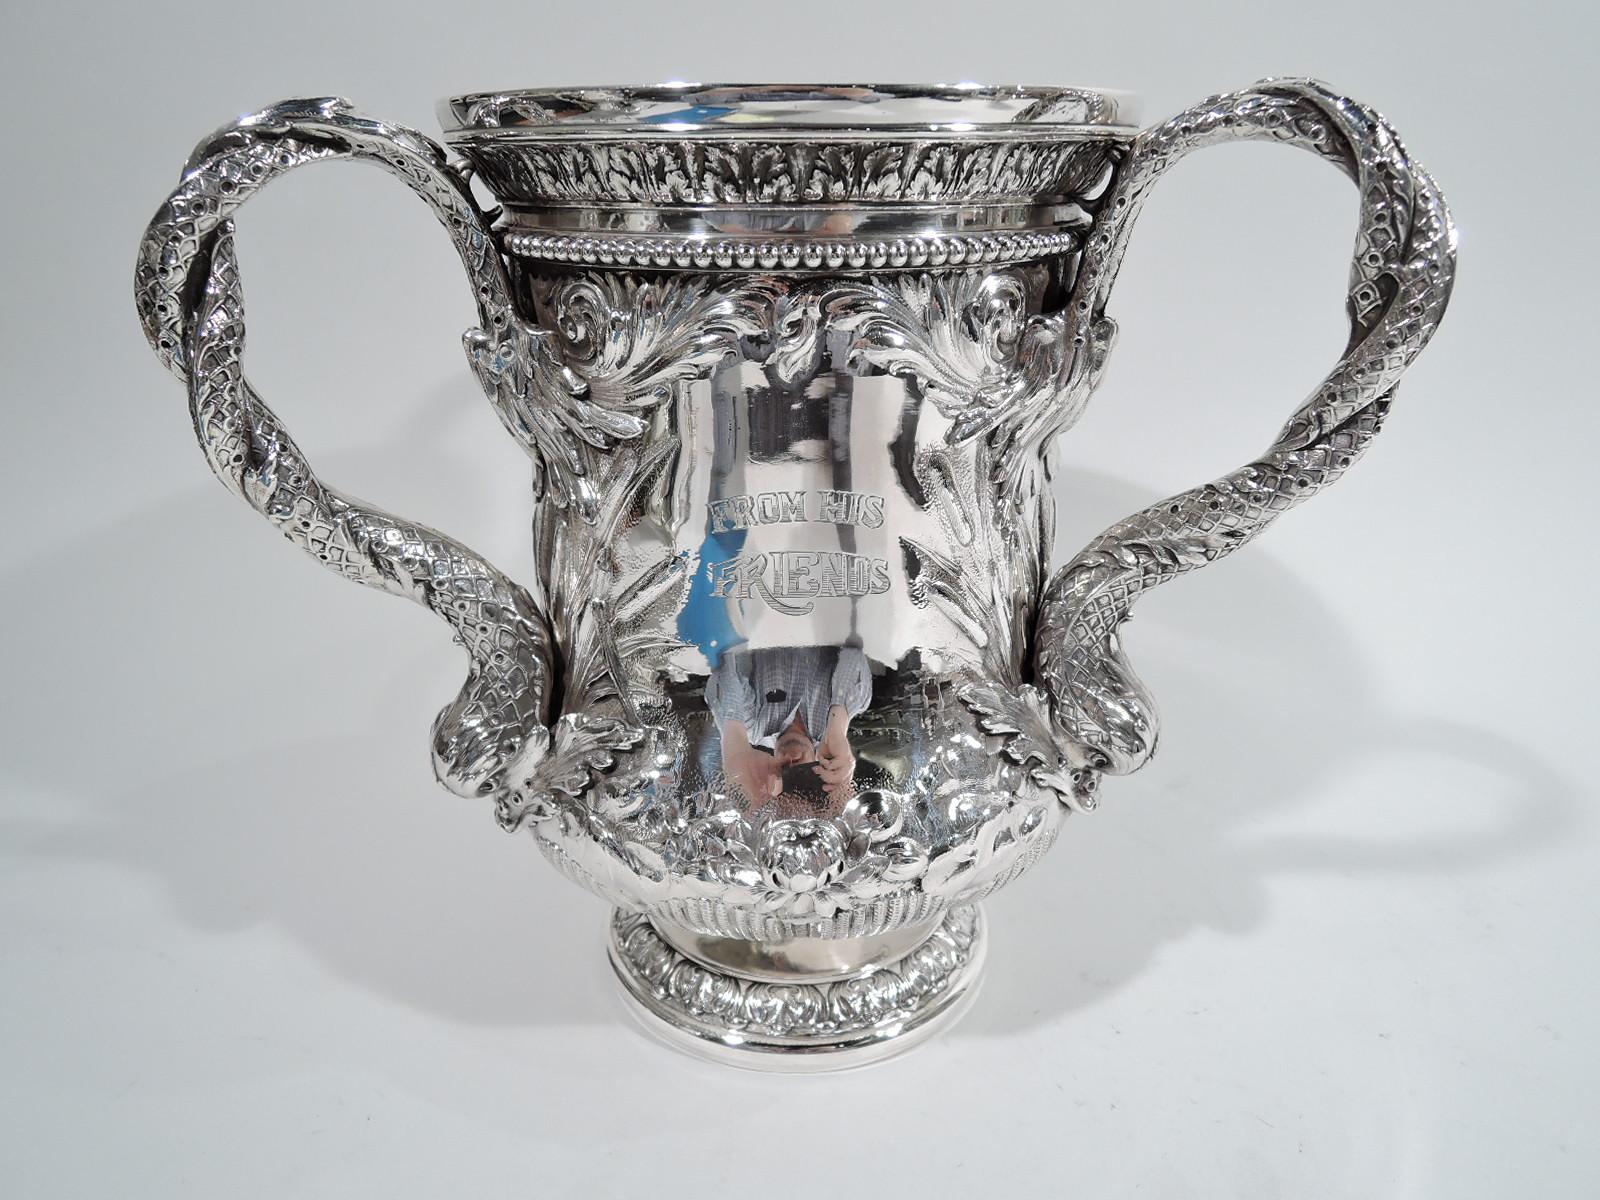 Victorian Classical sterling silver loving cup. Made by Gorham in Providence in 1893. Bellied urn with 3 twisted and scaly dolphin handles and raised and round foot. Interior richly gilt.

Three-sided presentation framed by dense and exuberant